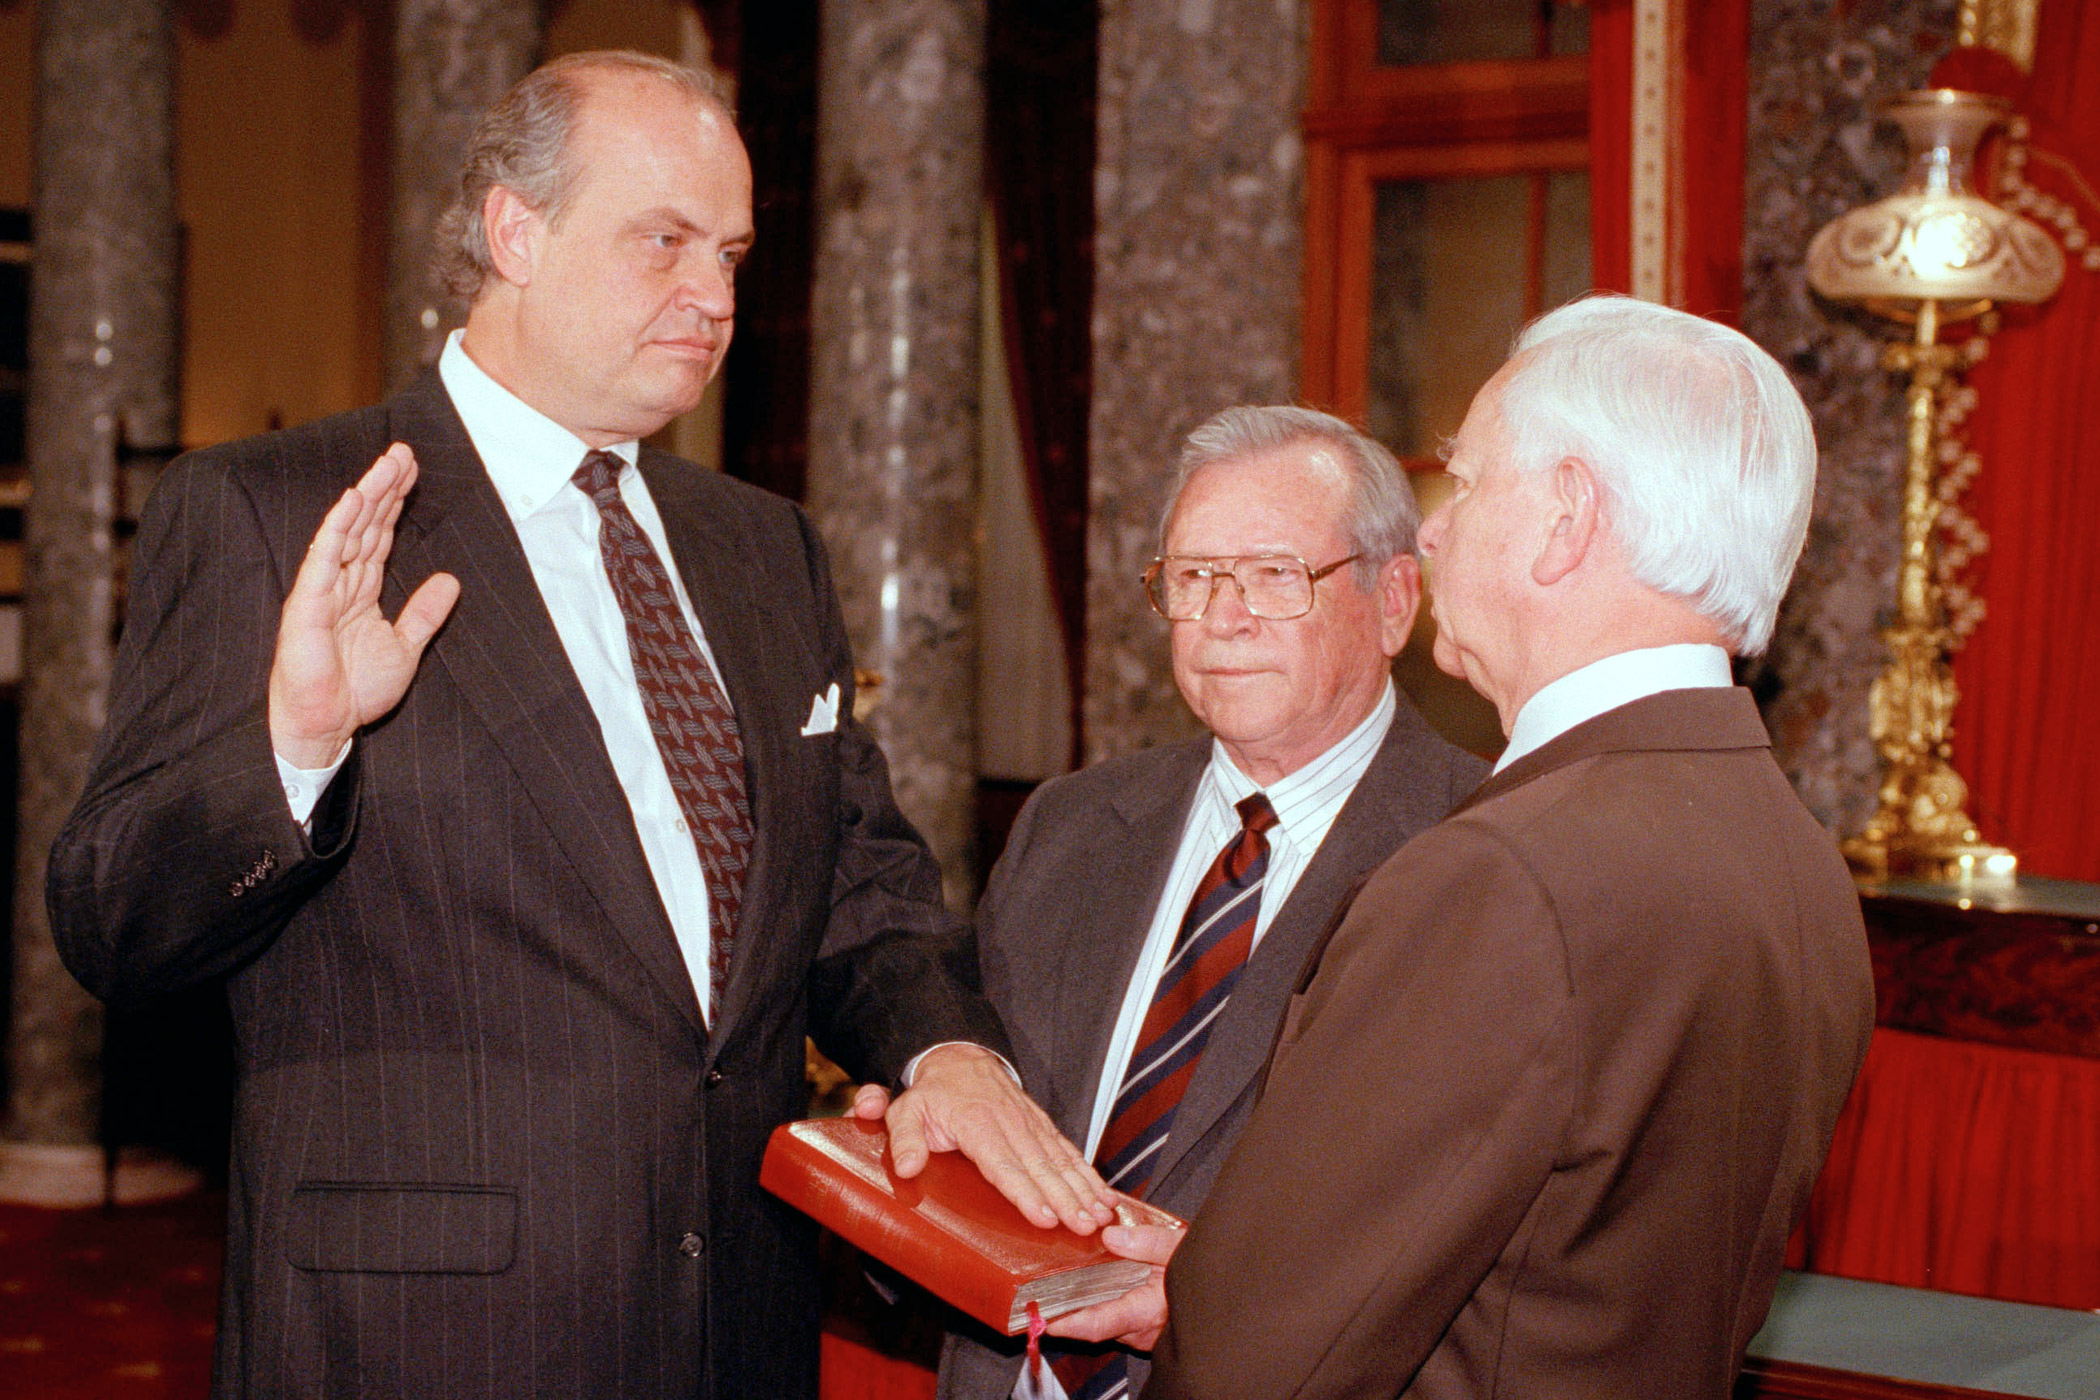 Sen. Fred Thompson (R-Tenn.), left, reenacts taking the Senate oath administered by Senate President Pro Tempore Robert Byrd on Dec. 9, 1994, in the Old Senate Chamber on Capitol Hill.  Former Tennessee Sen. Howard Baker holds the Bible during the ceremony.